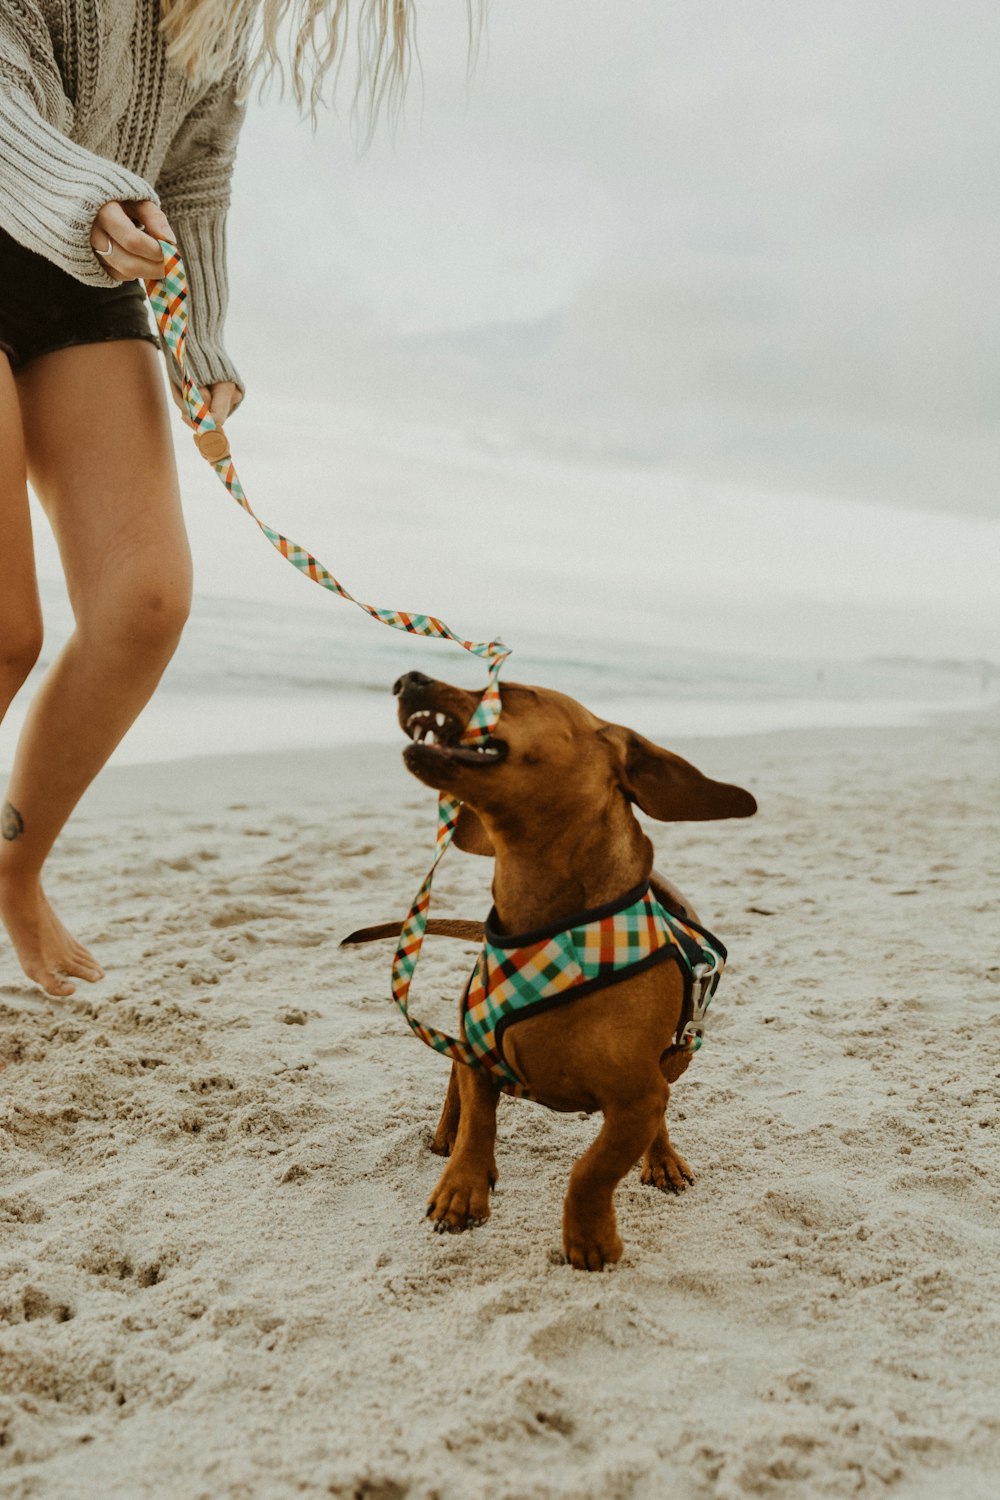 brown short coated dog wearing blue and white striped shirt on beach during daytime